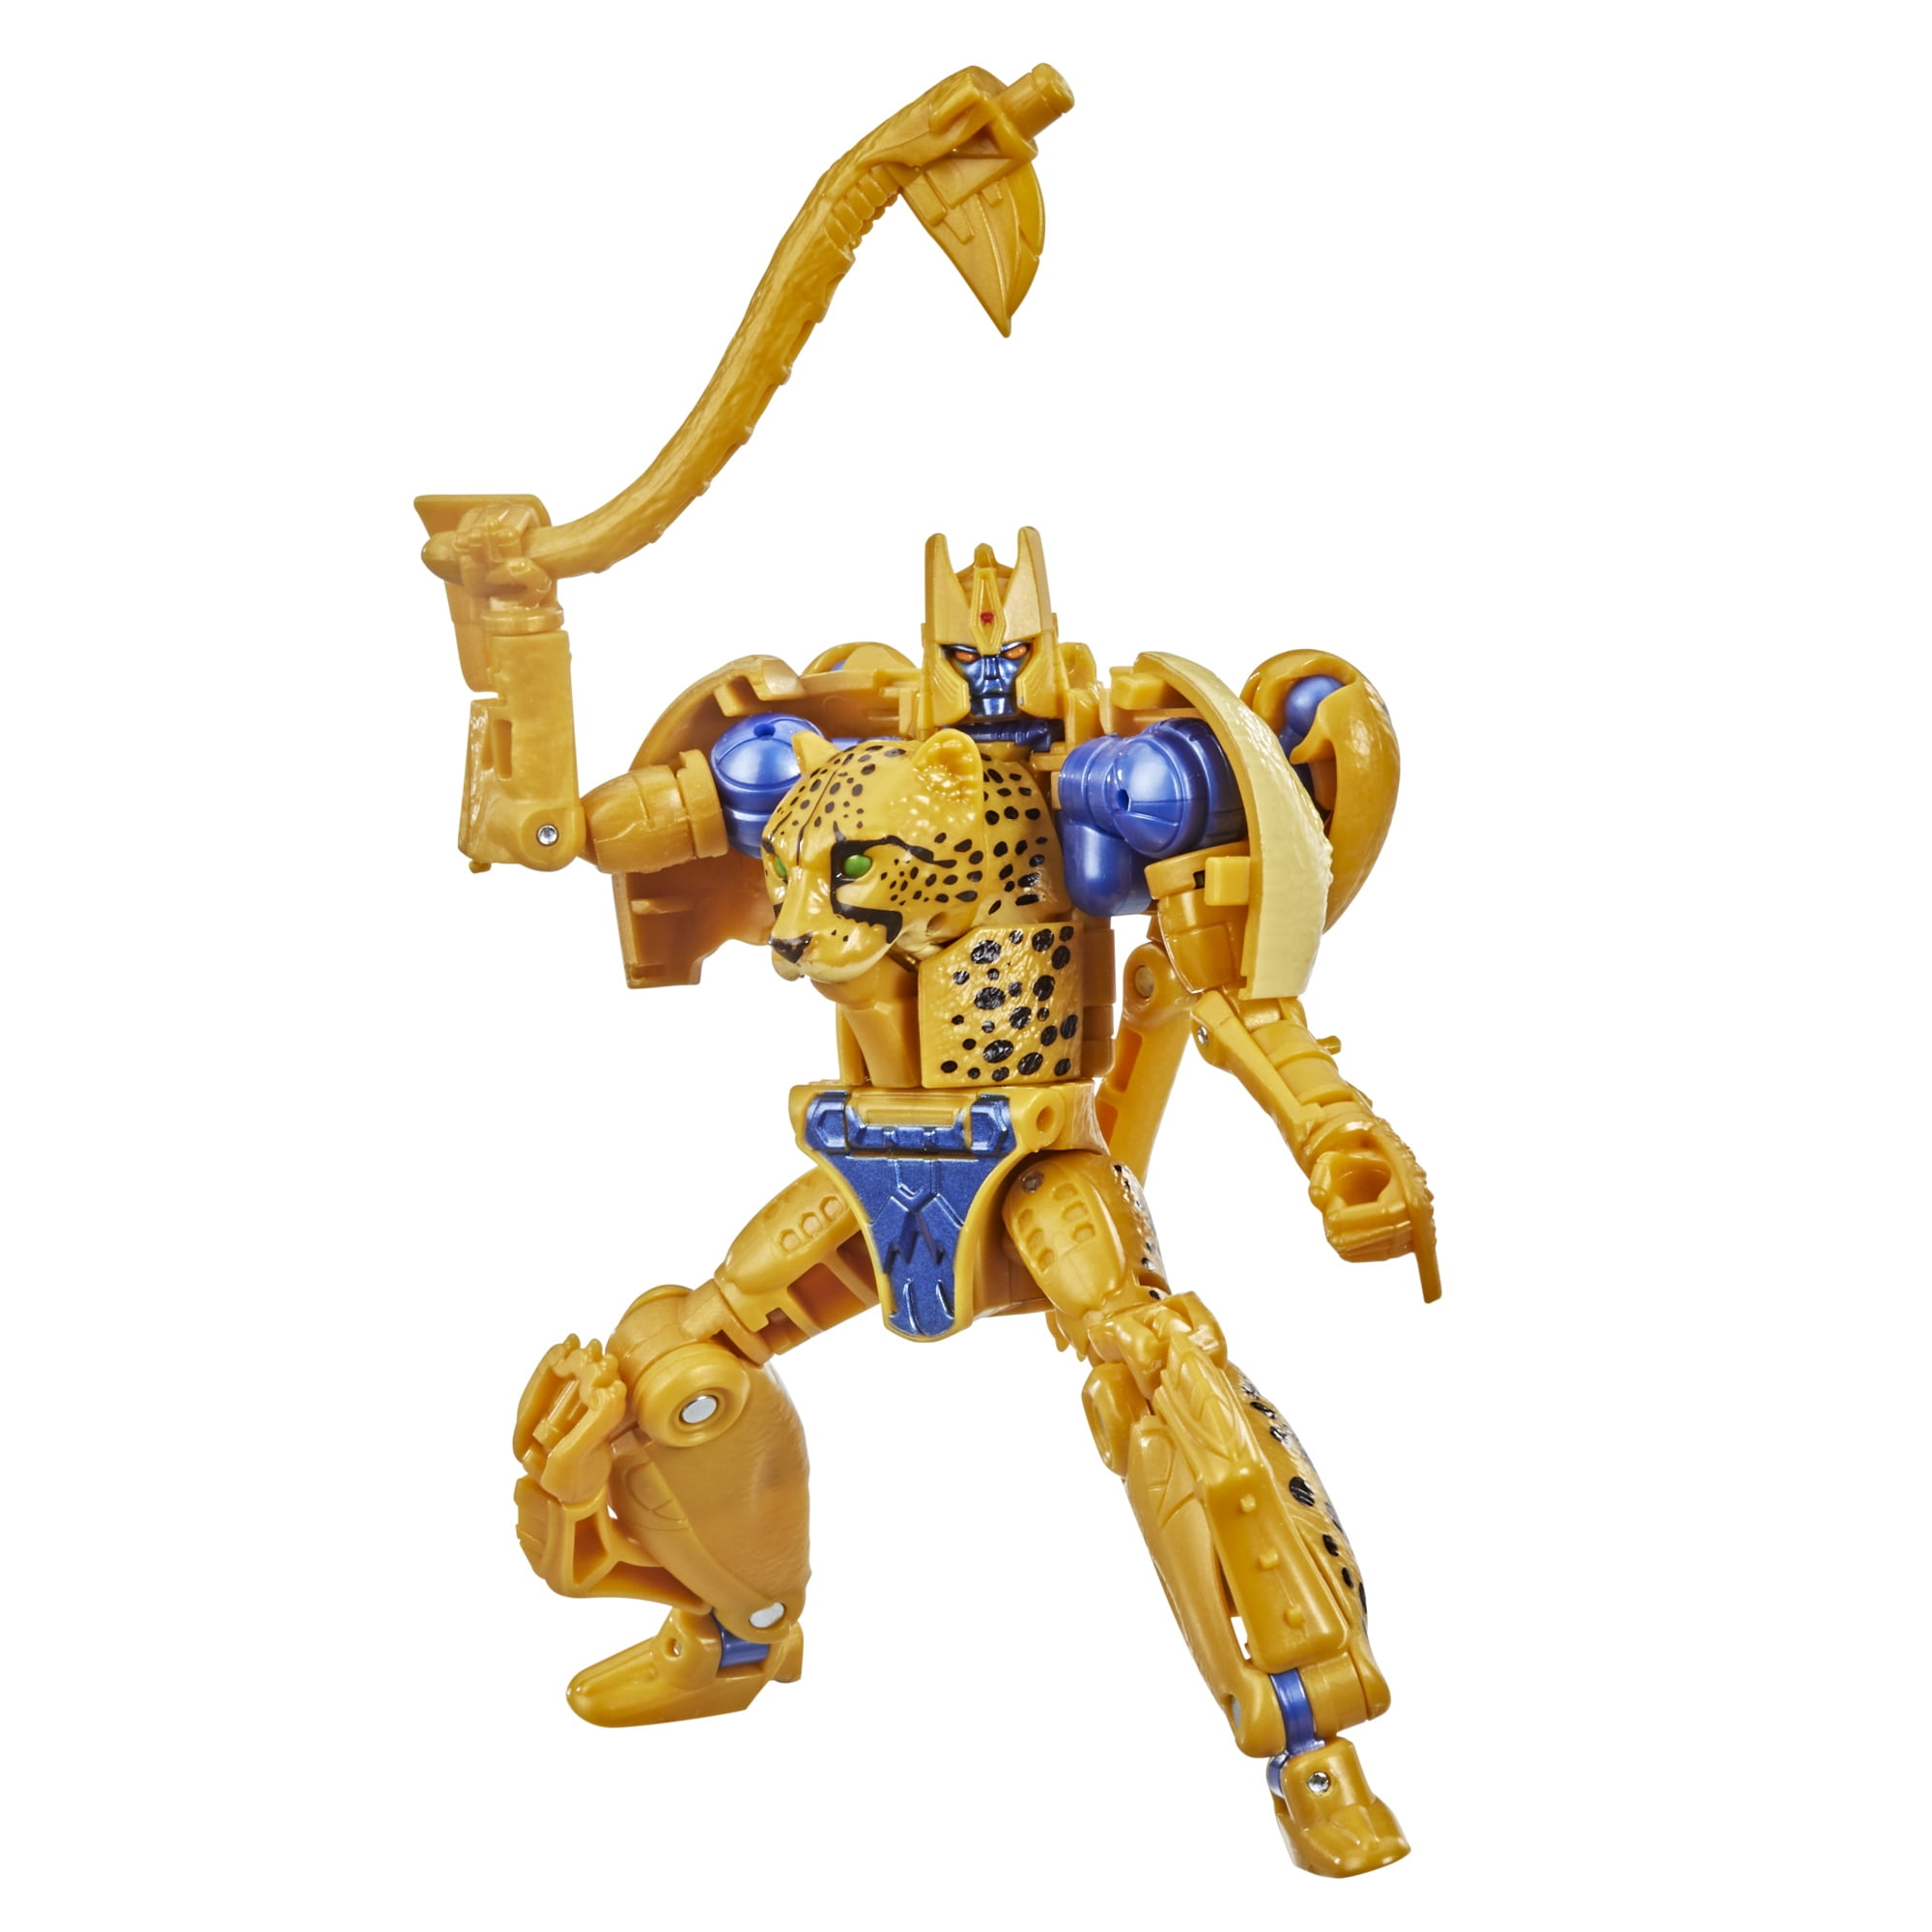 Transformers Generations WFC Kingdom Deluxe Cheetor Action Figure